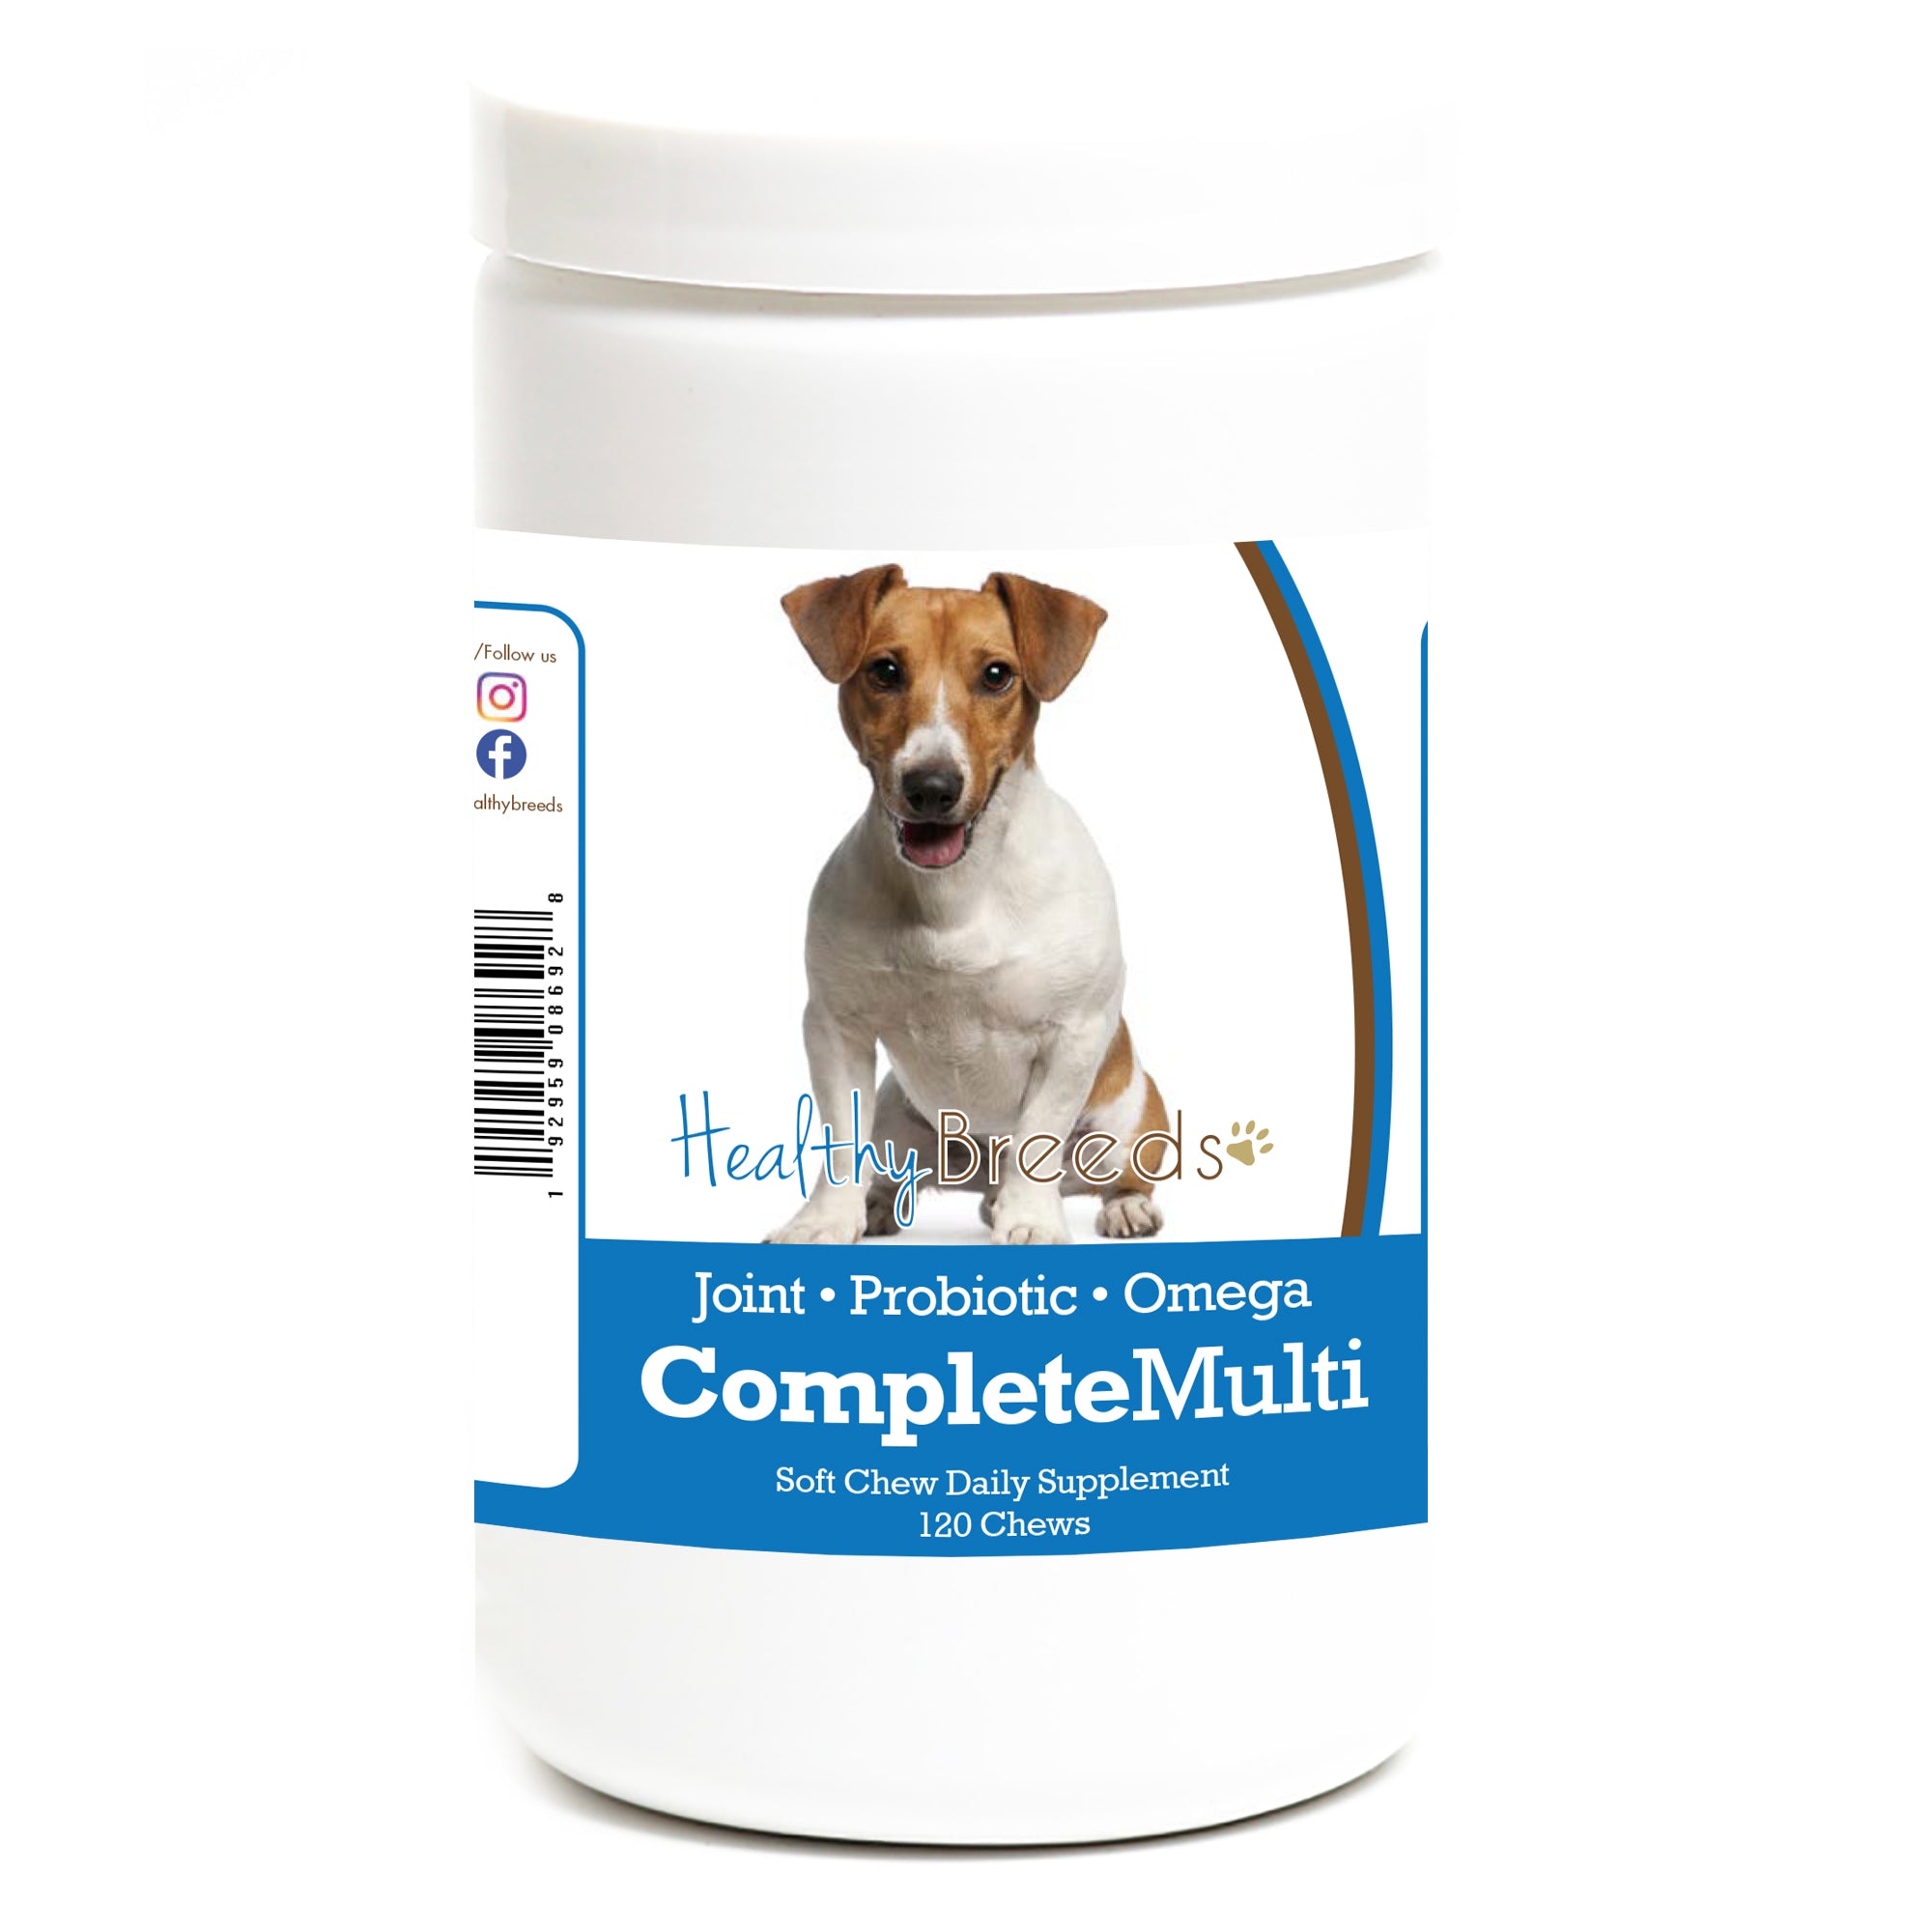 Jack Russell Terrier All In One Multivitamin Soft Chew 120 Count